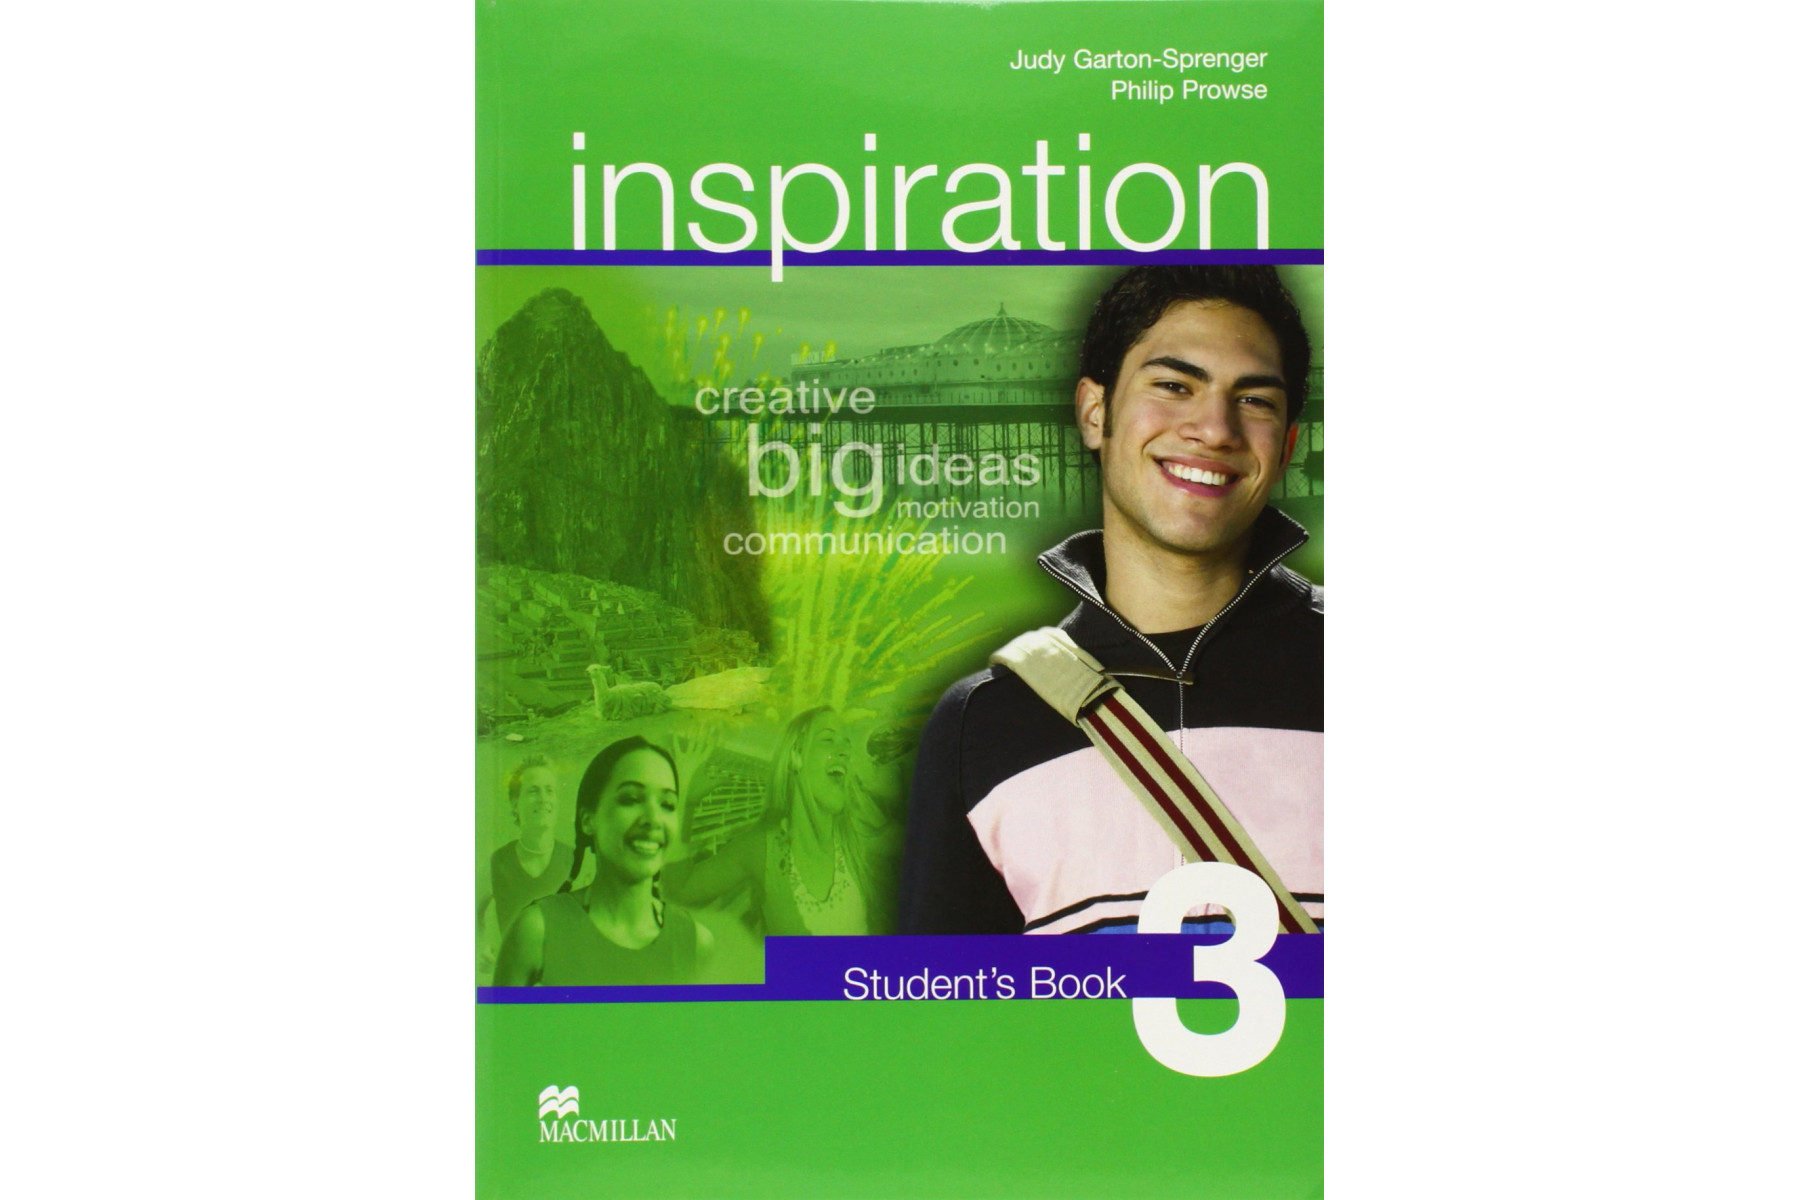 Inspiration 3 Student's Book